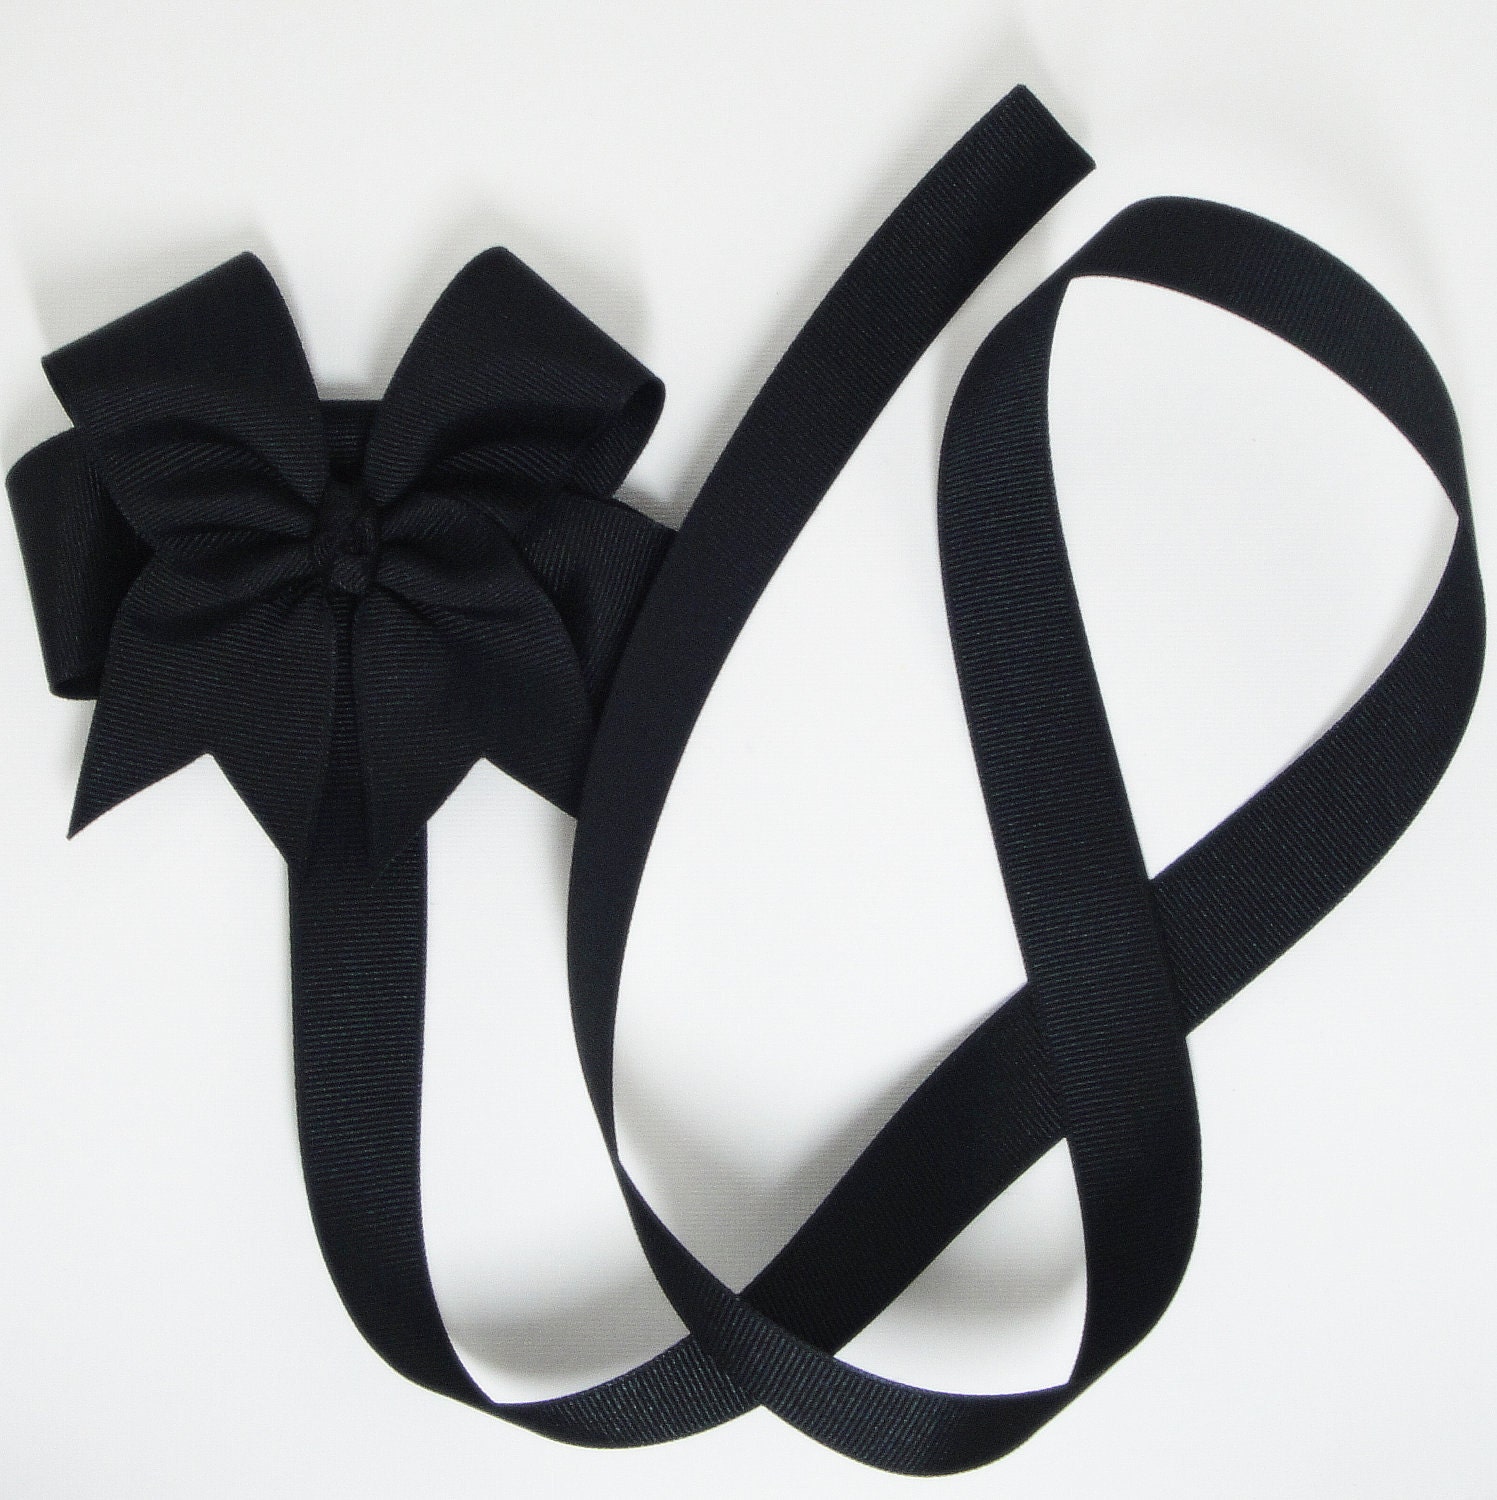 Free USA Shipping Over 20 - Solid Black or Any Color Hairbow Holder with Large Size Tails Down Boutique Hair Bow - HairbowDepot